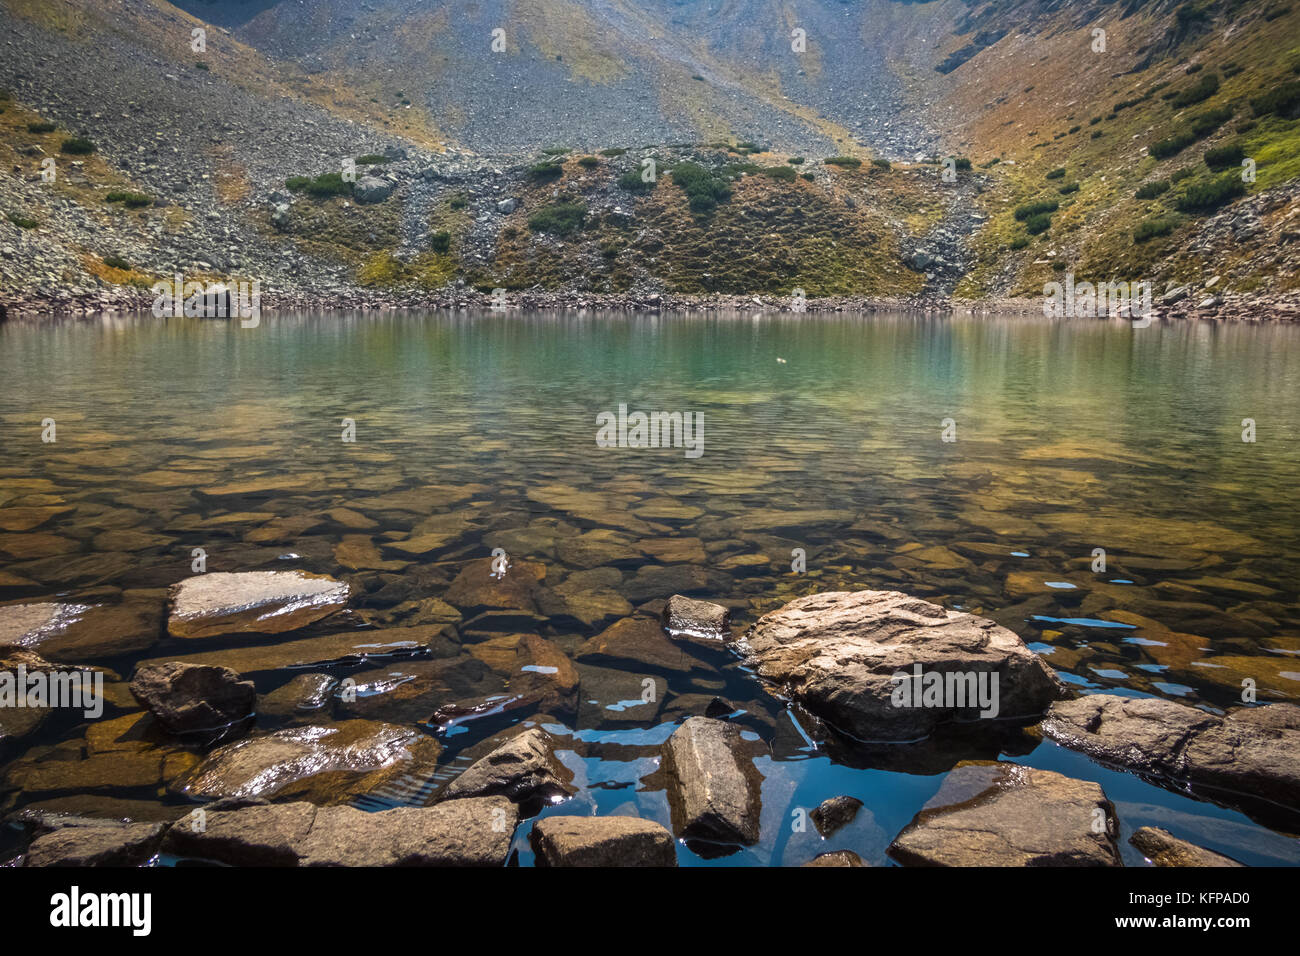 Rocks at the shore of a glacial lake high in the Mountains. Stock Photo